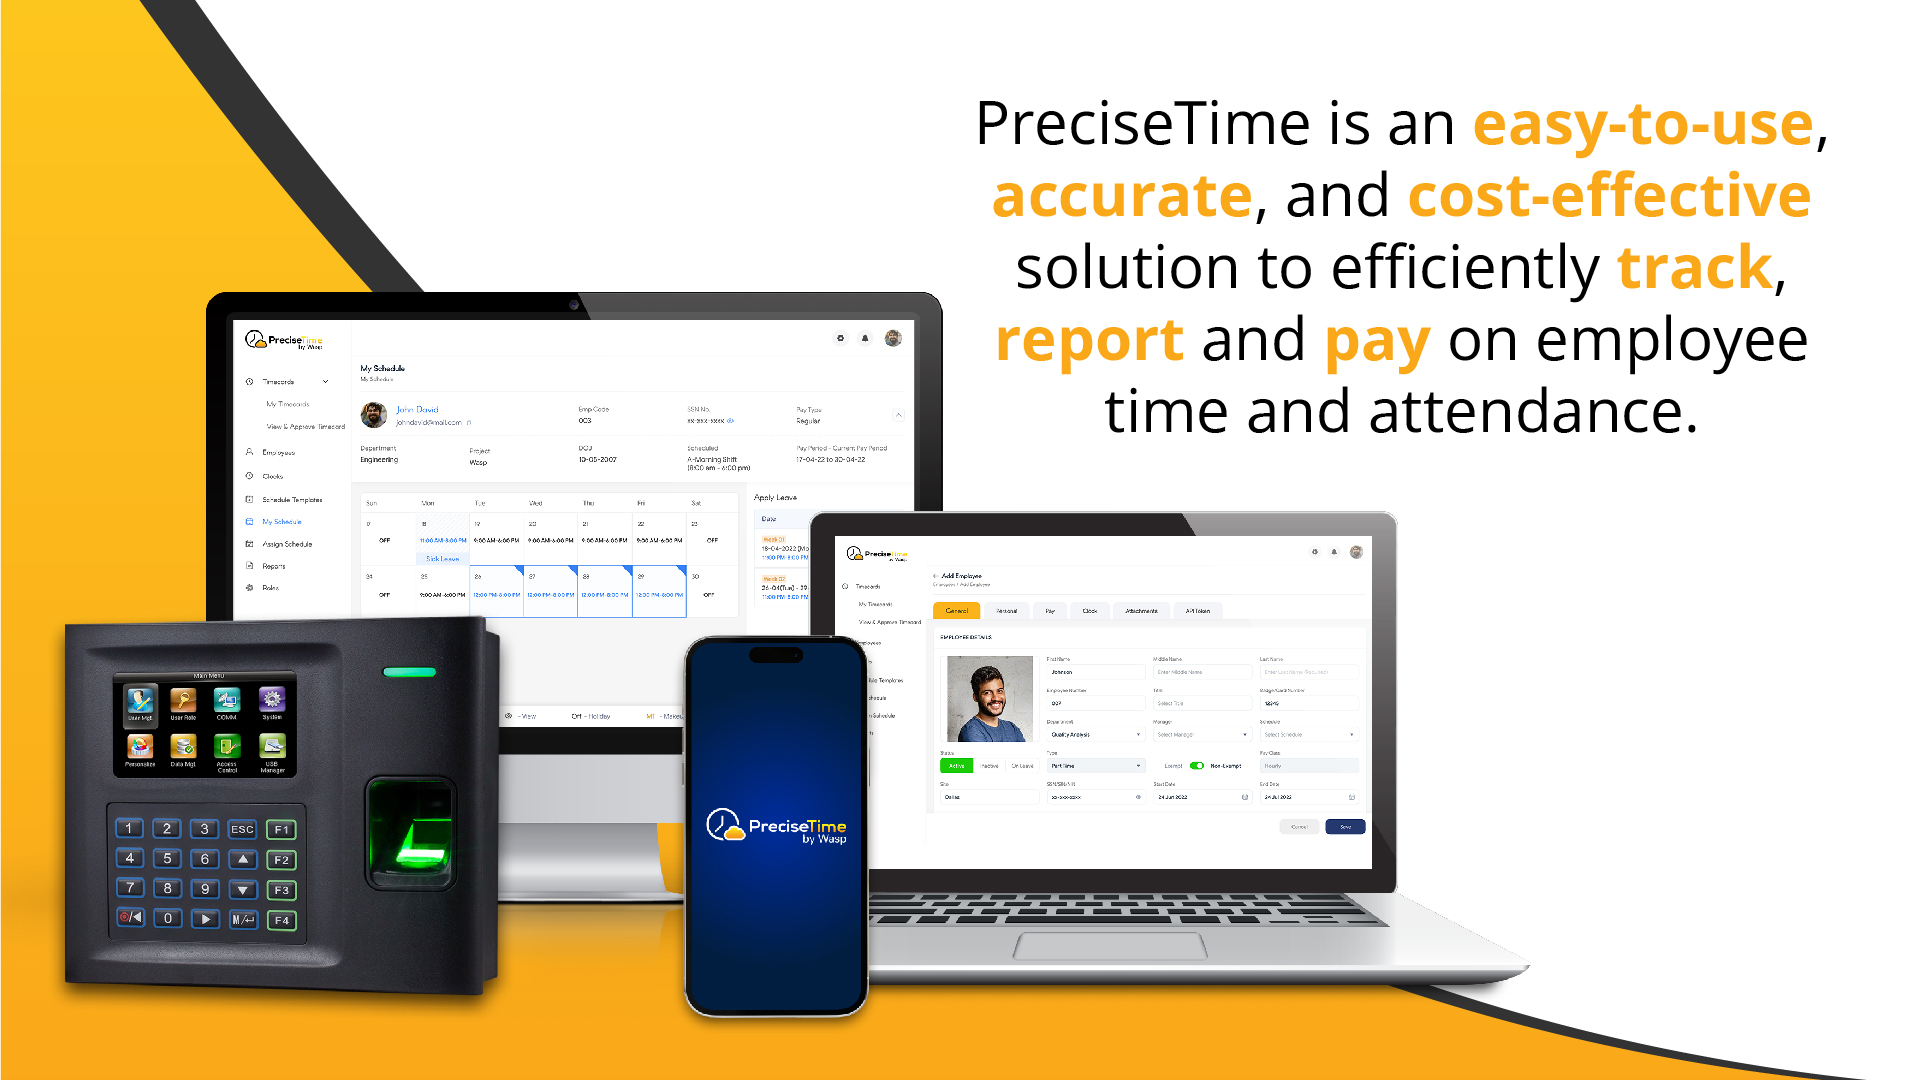 PreciseTime is an easy-to-use, accurate, and cost-effective solution to efficiently track, report and pay on employee time and attendance